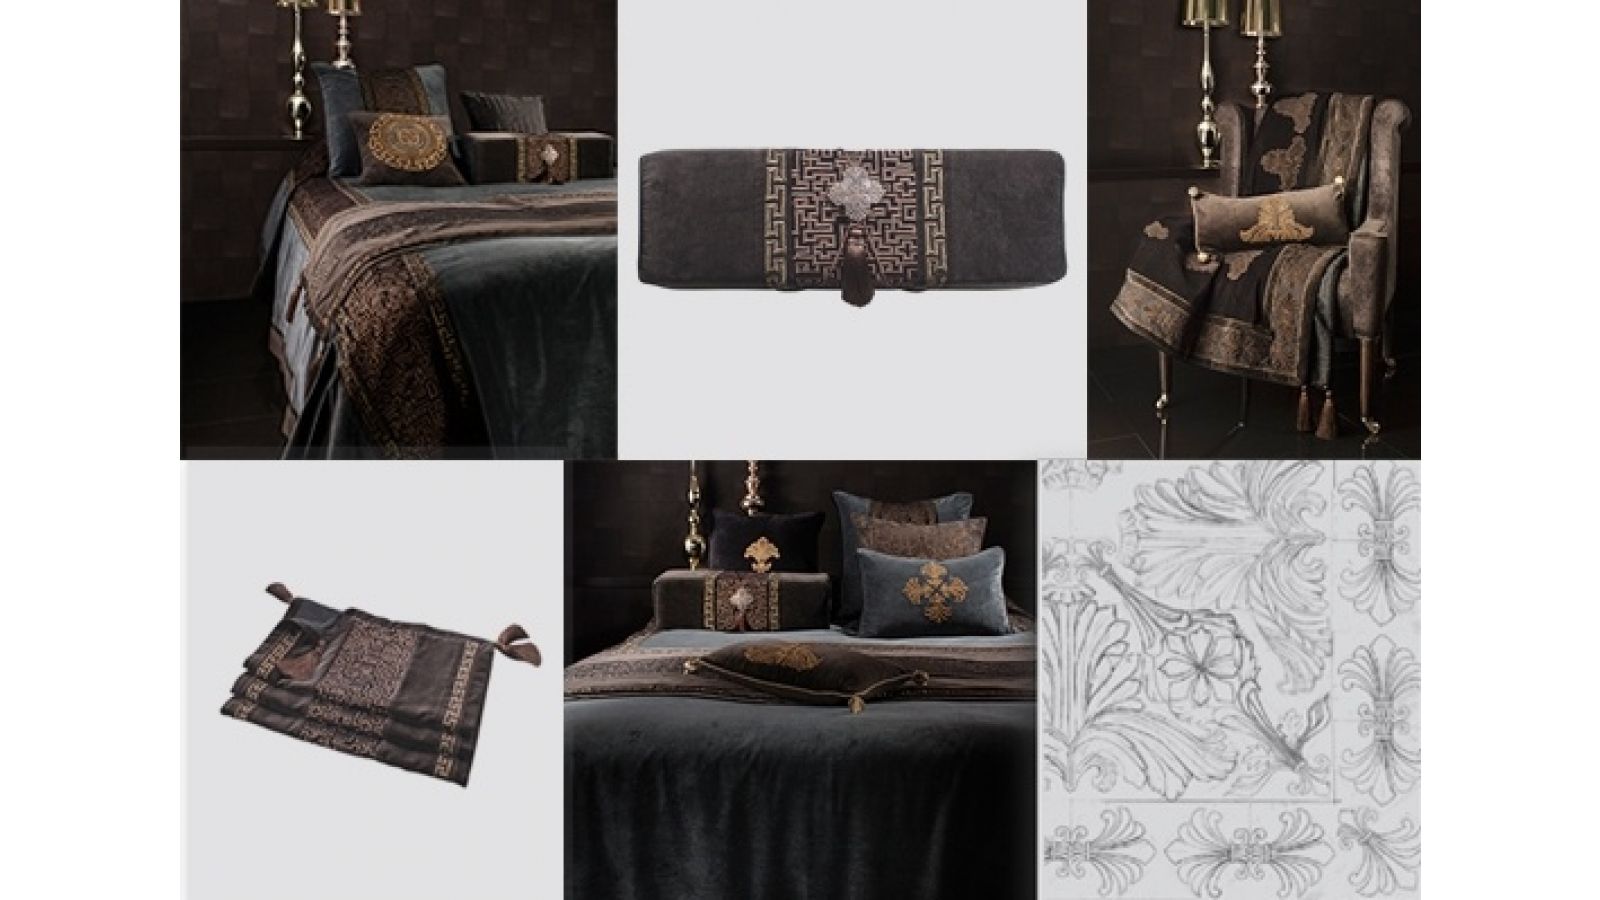 Fabulous Design luxury home accessories at affordable prices